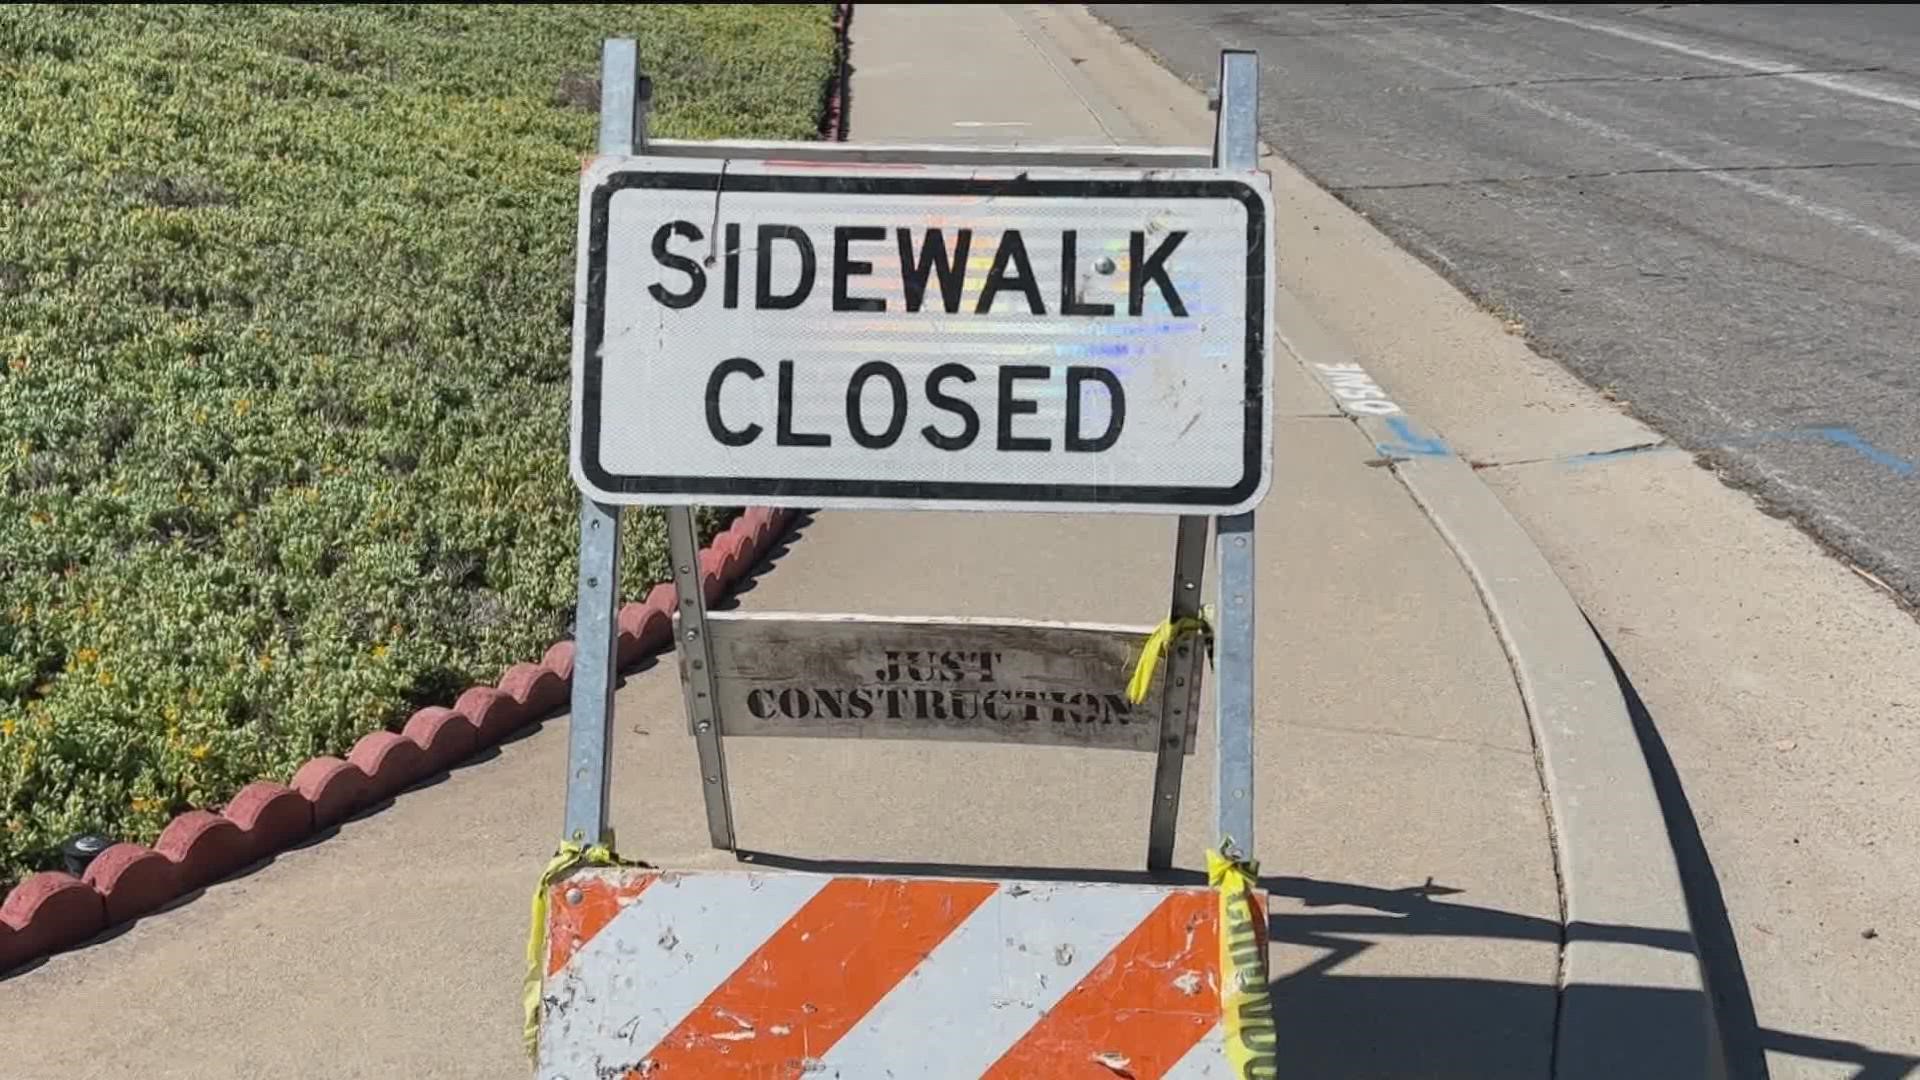 Residents were pleased to see the construction, until they found out it was for the sidewalks and not the streets that have been in poor condition.